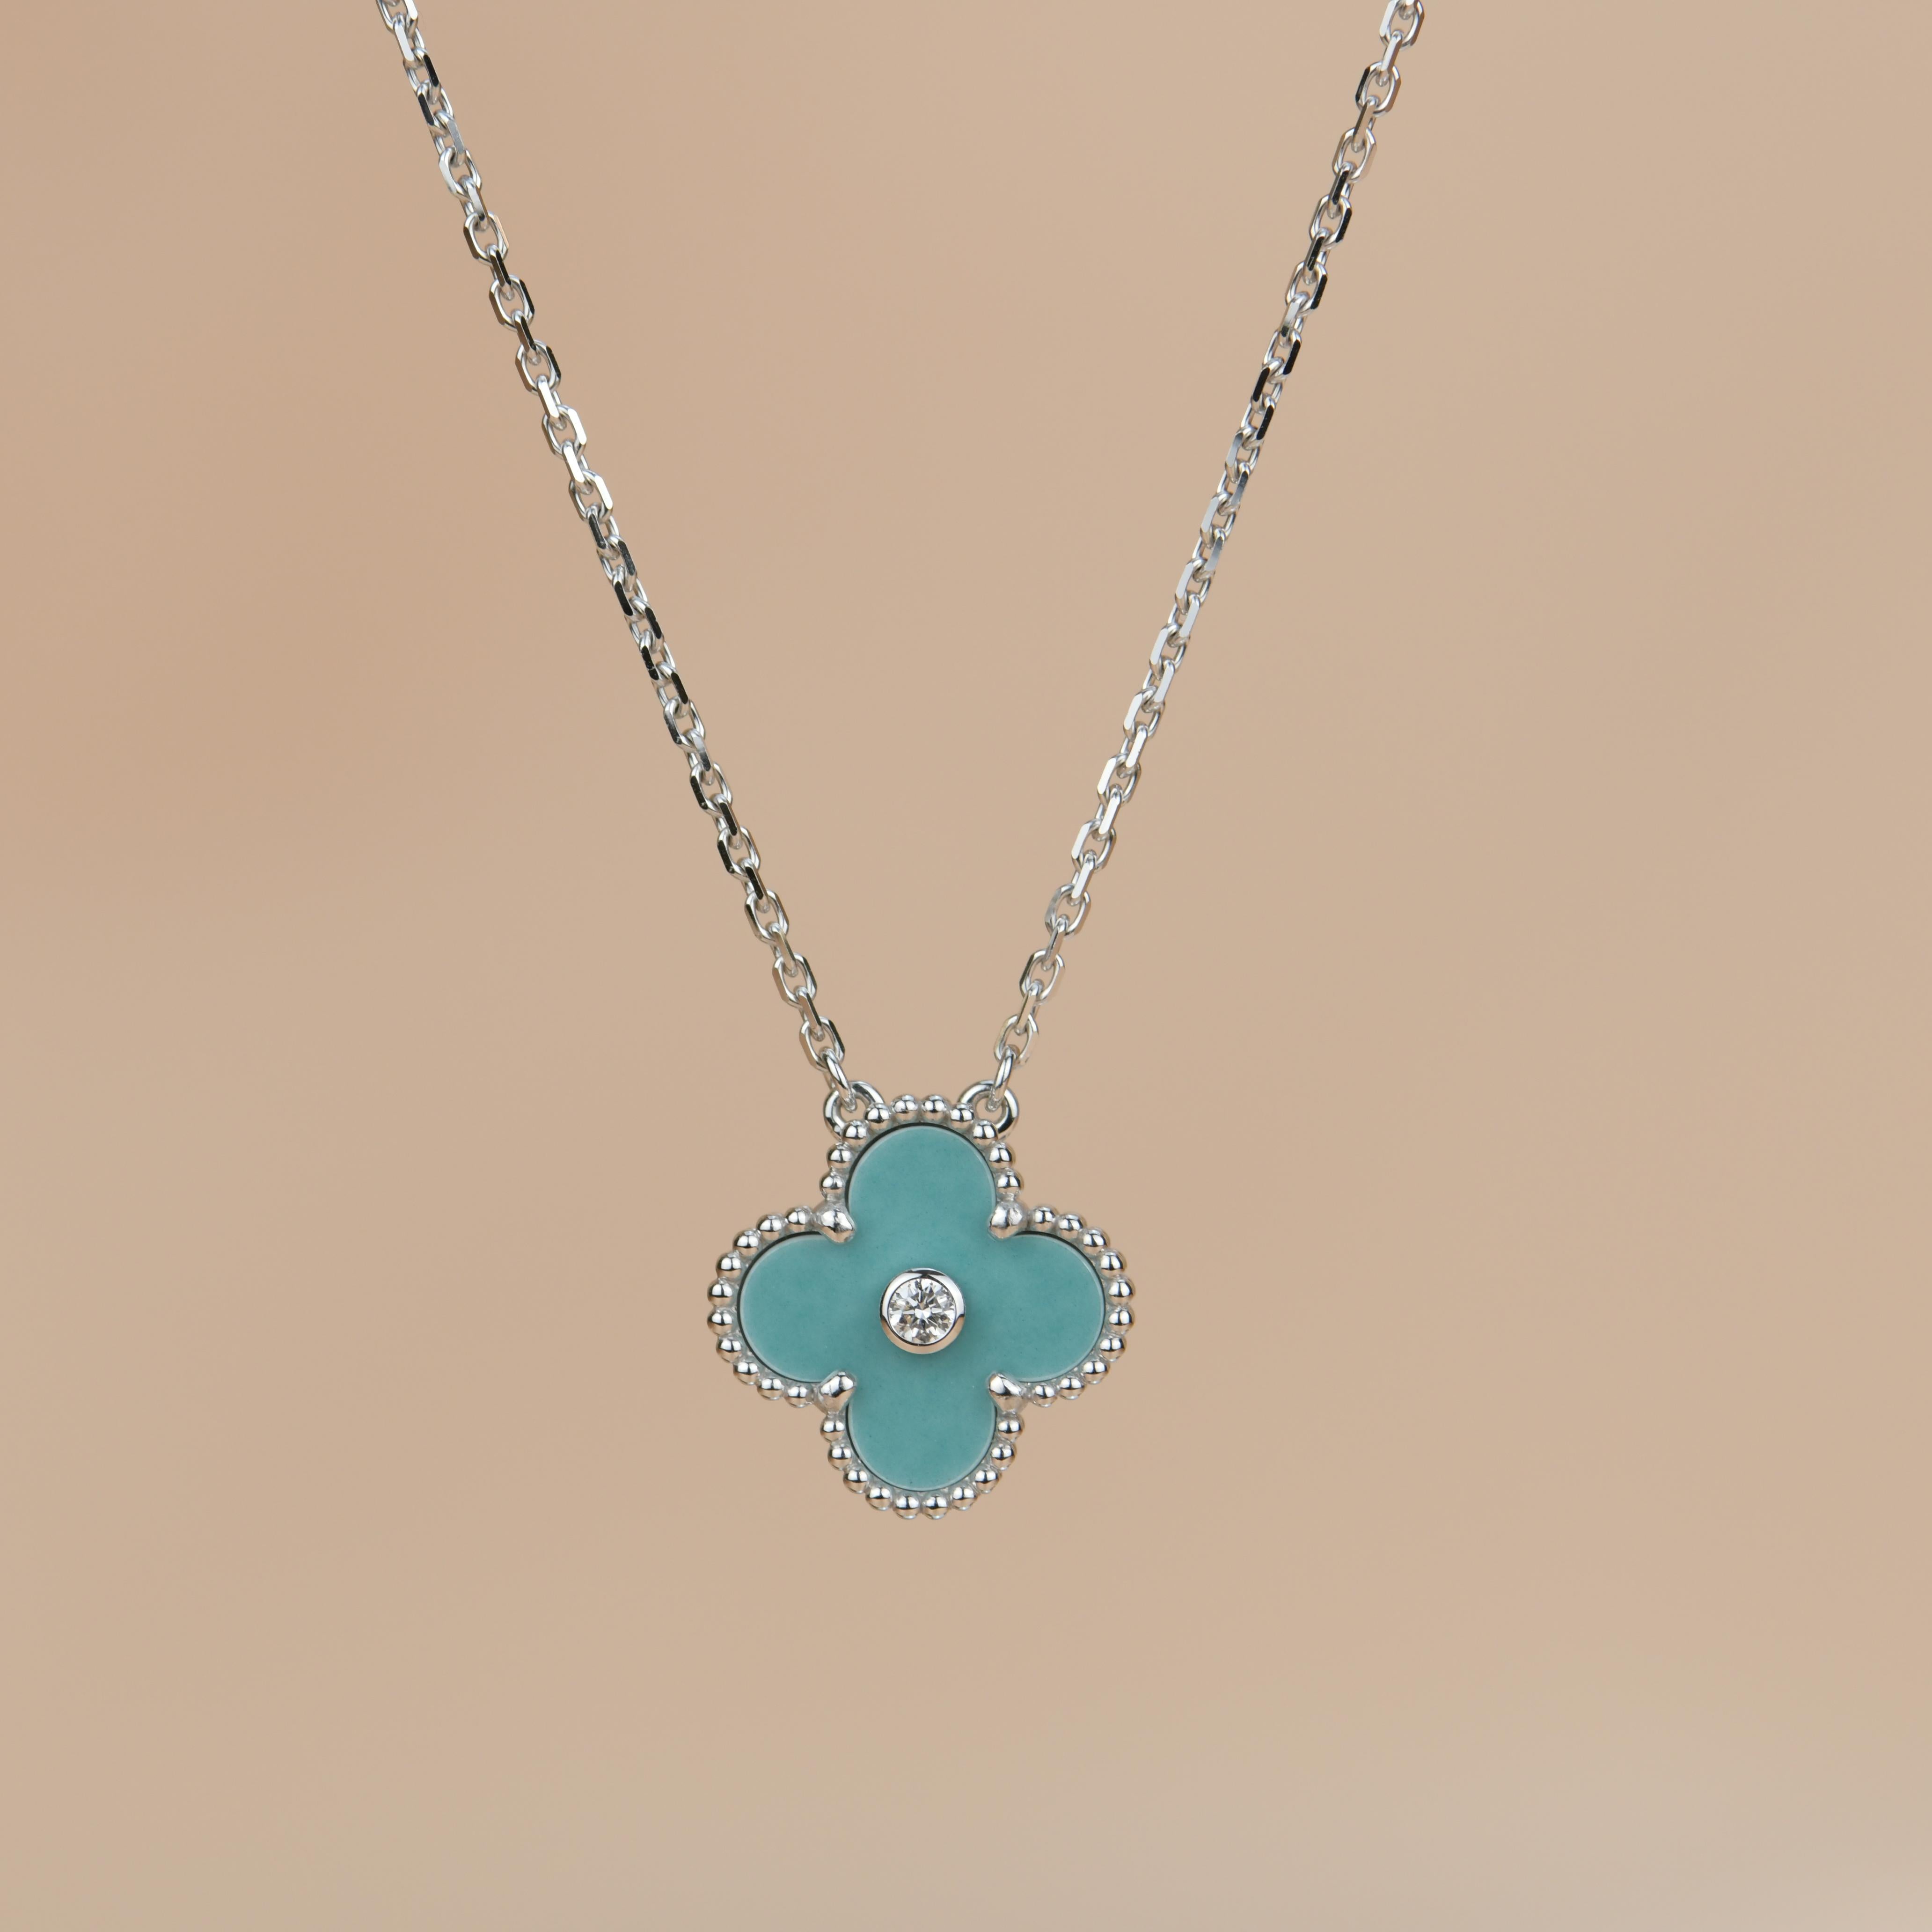 18K White Gold Limited Edition Alhambra Diamond And Green Celadon Sèvres Porcelain Necklace was released in 2022 Christmas as the holiday pendant. 

- Limited edition released in 2022 as the holiday pendant
- Light green celadon Sèvres porcelain,